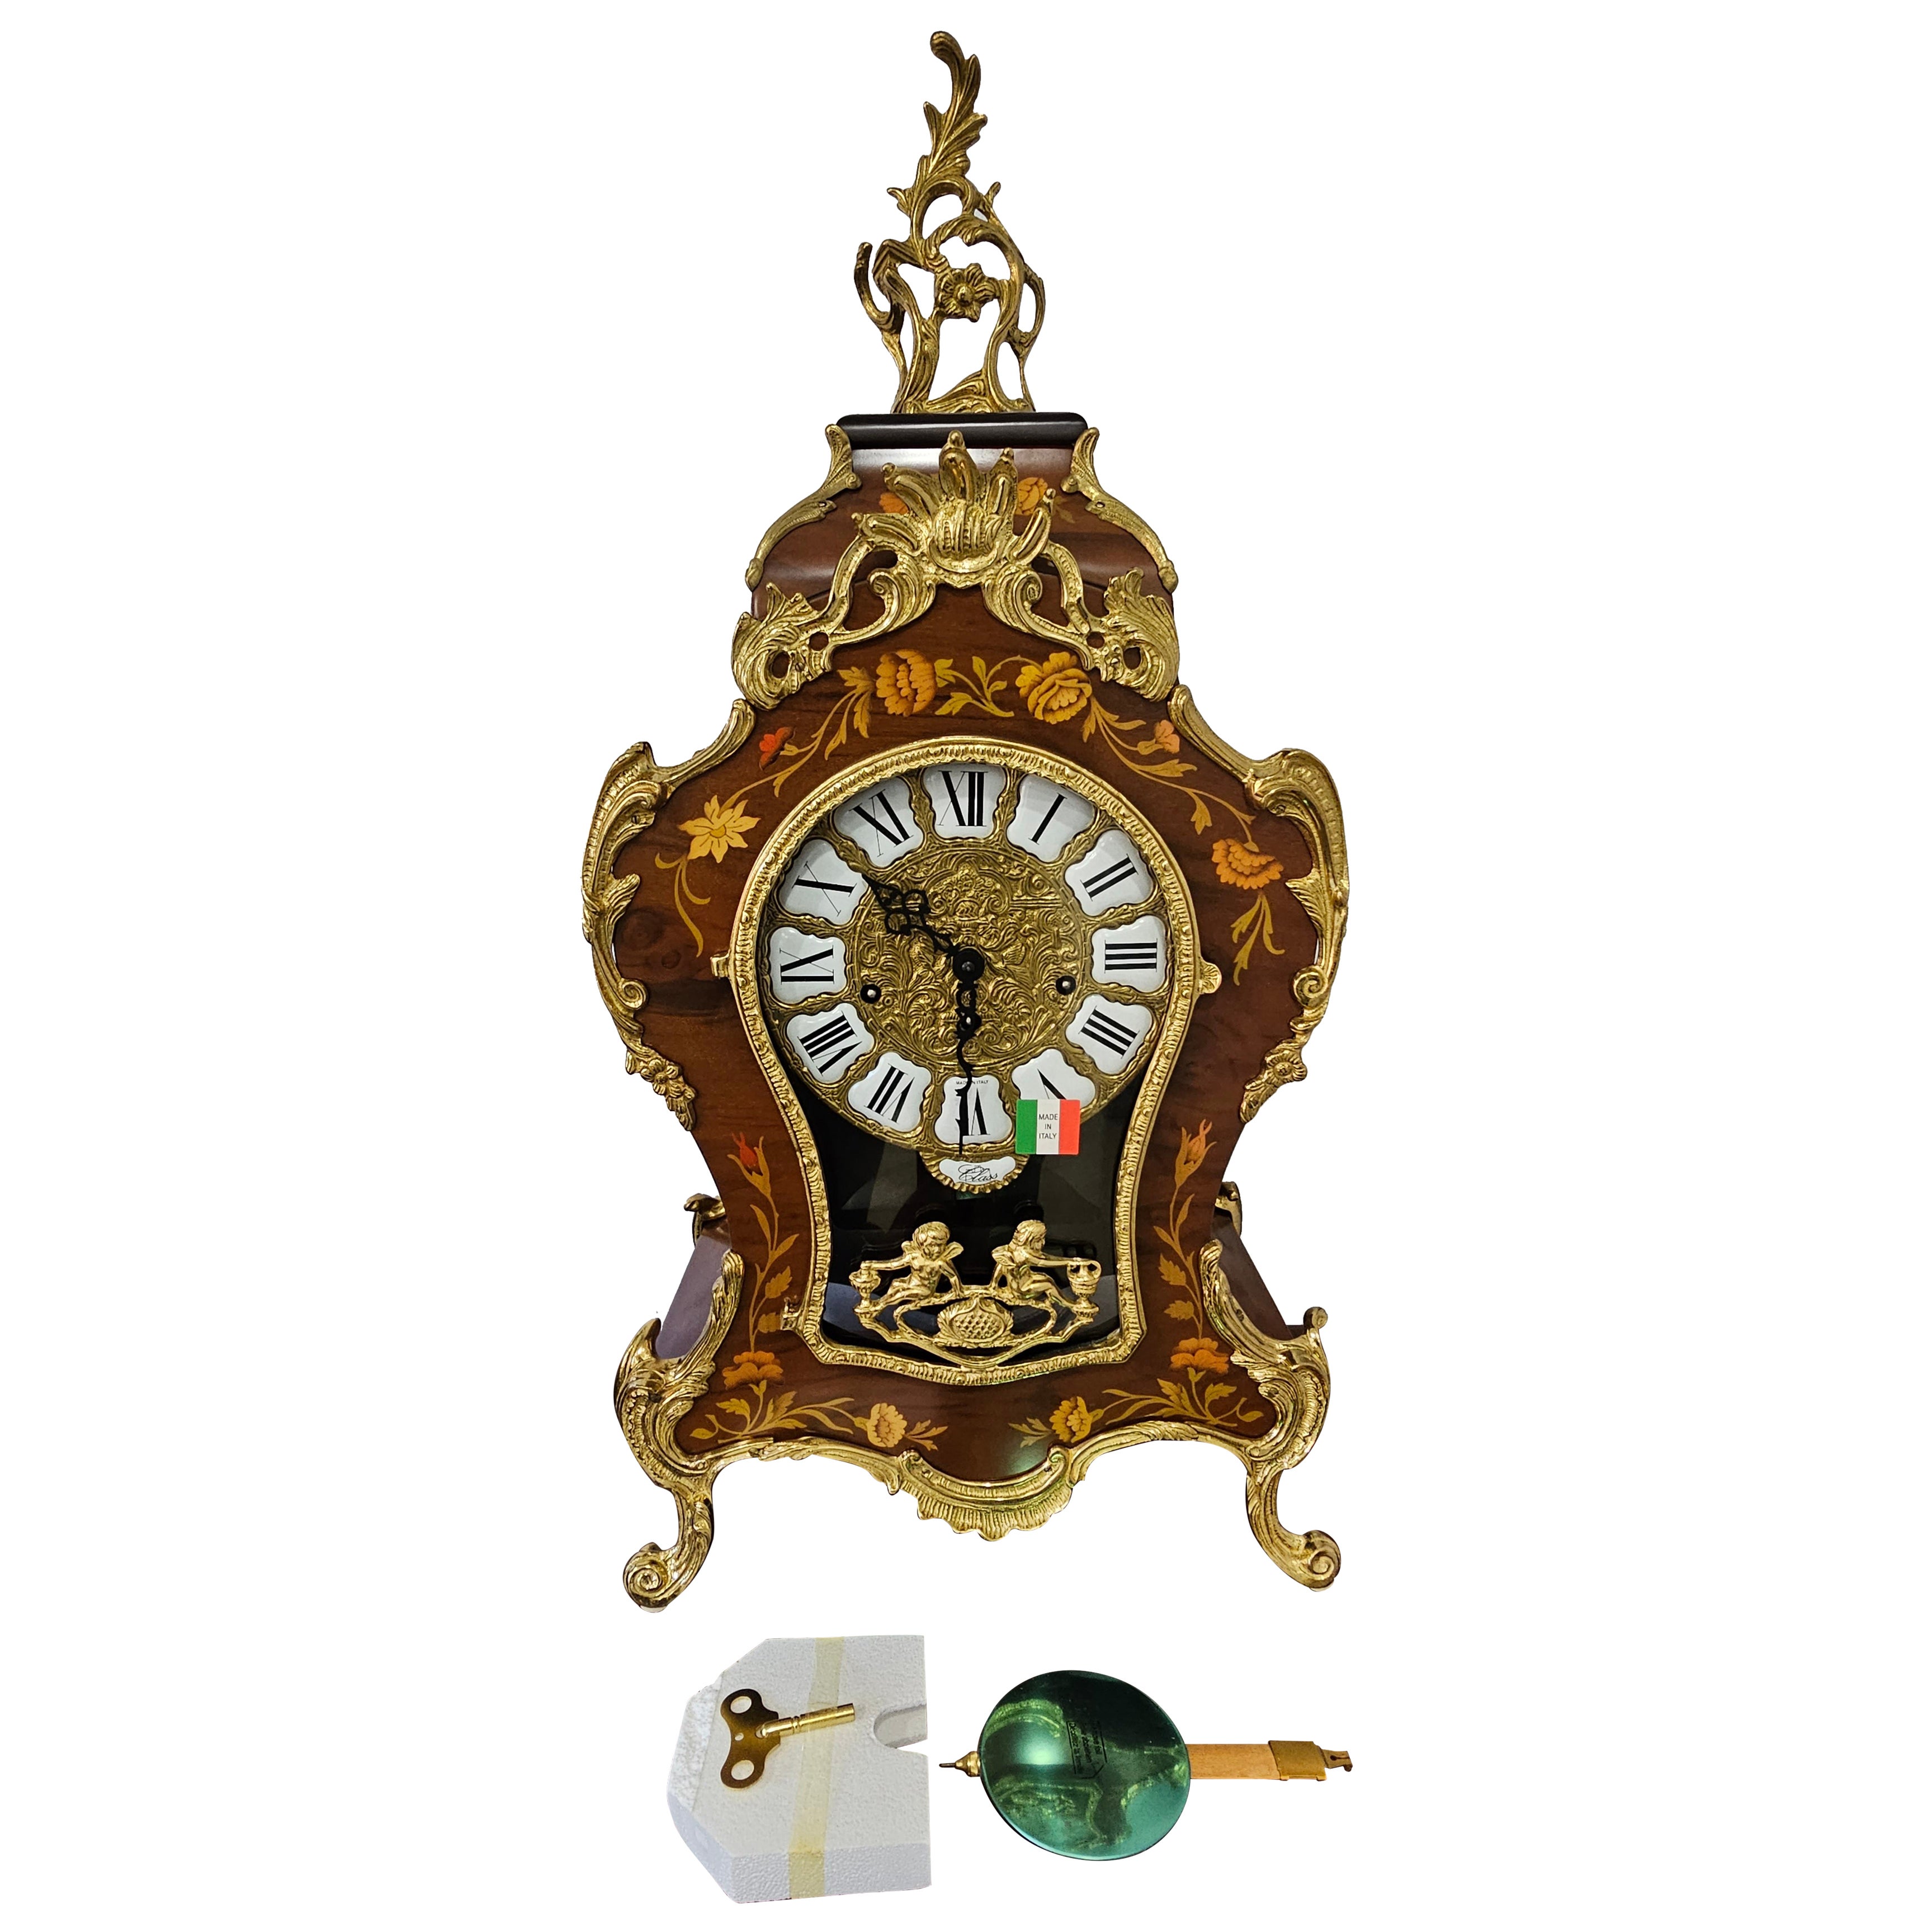 New Franz Hermle Mantel Clock in DeArt Italian Fine Marquetry and Ormolu Case, N For Sale